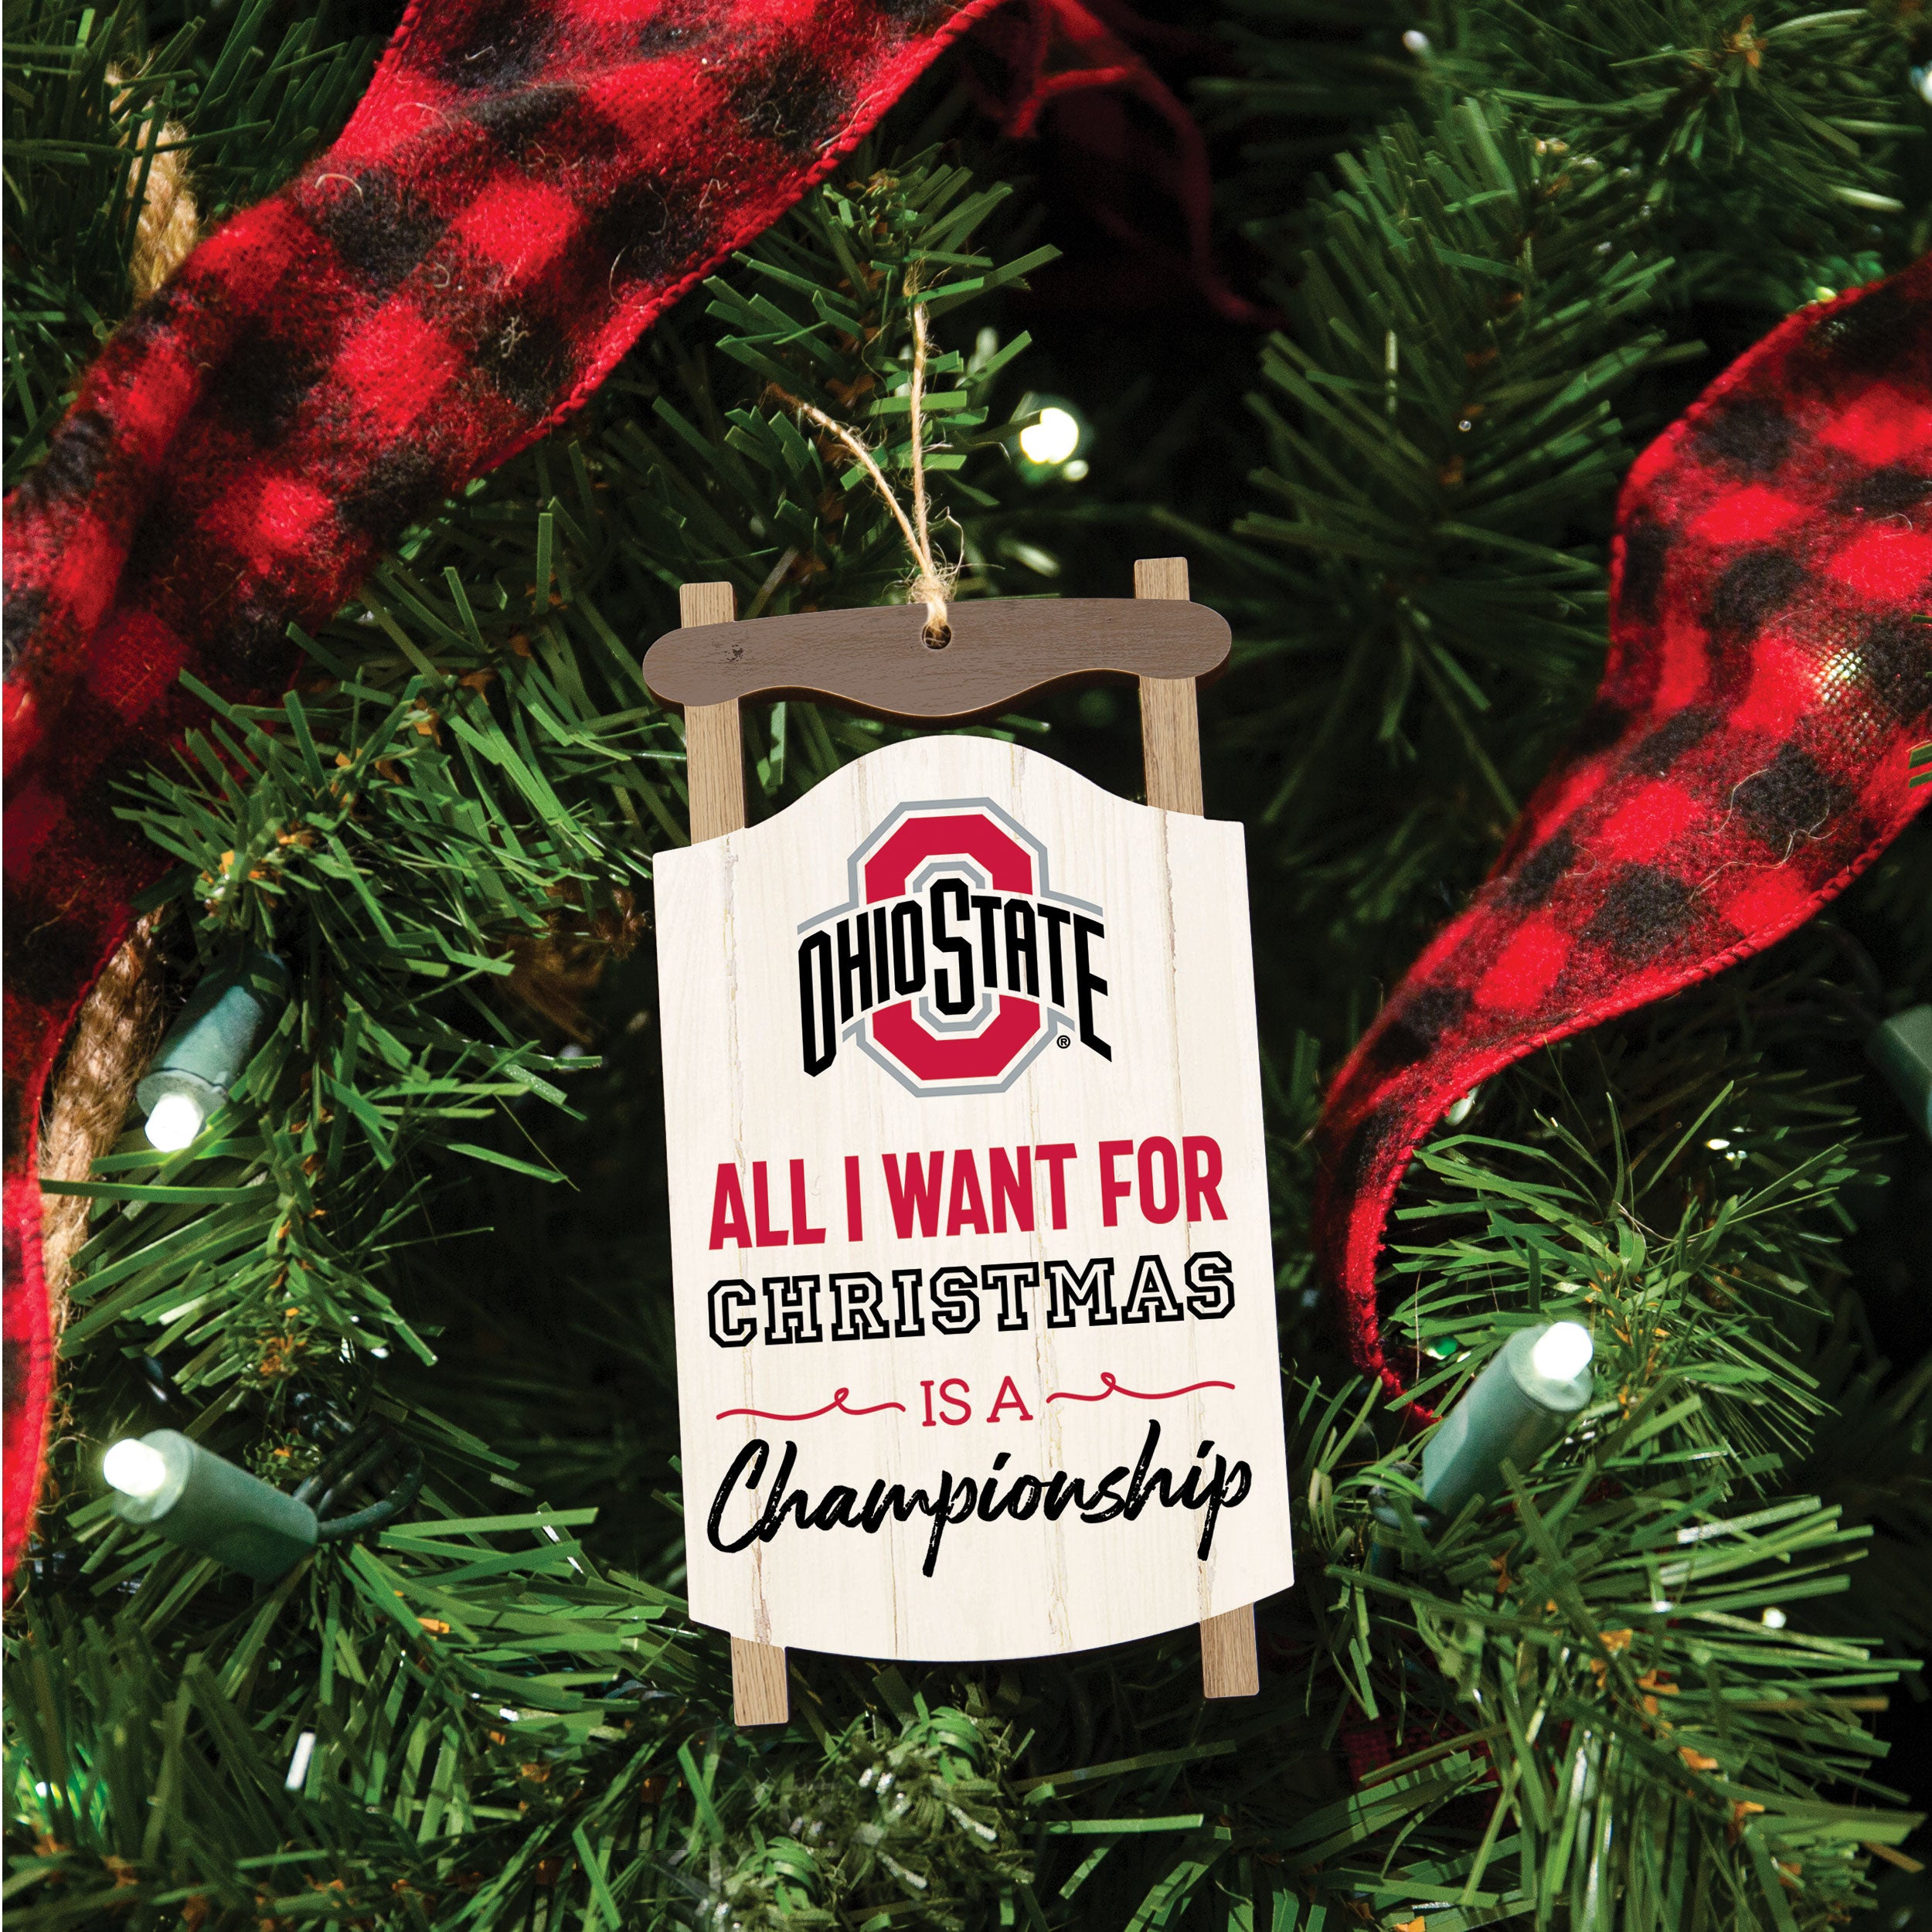 All I Want for Christmas is a Championship - The Ohio State University Sled Ornament